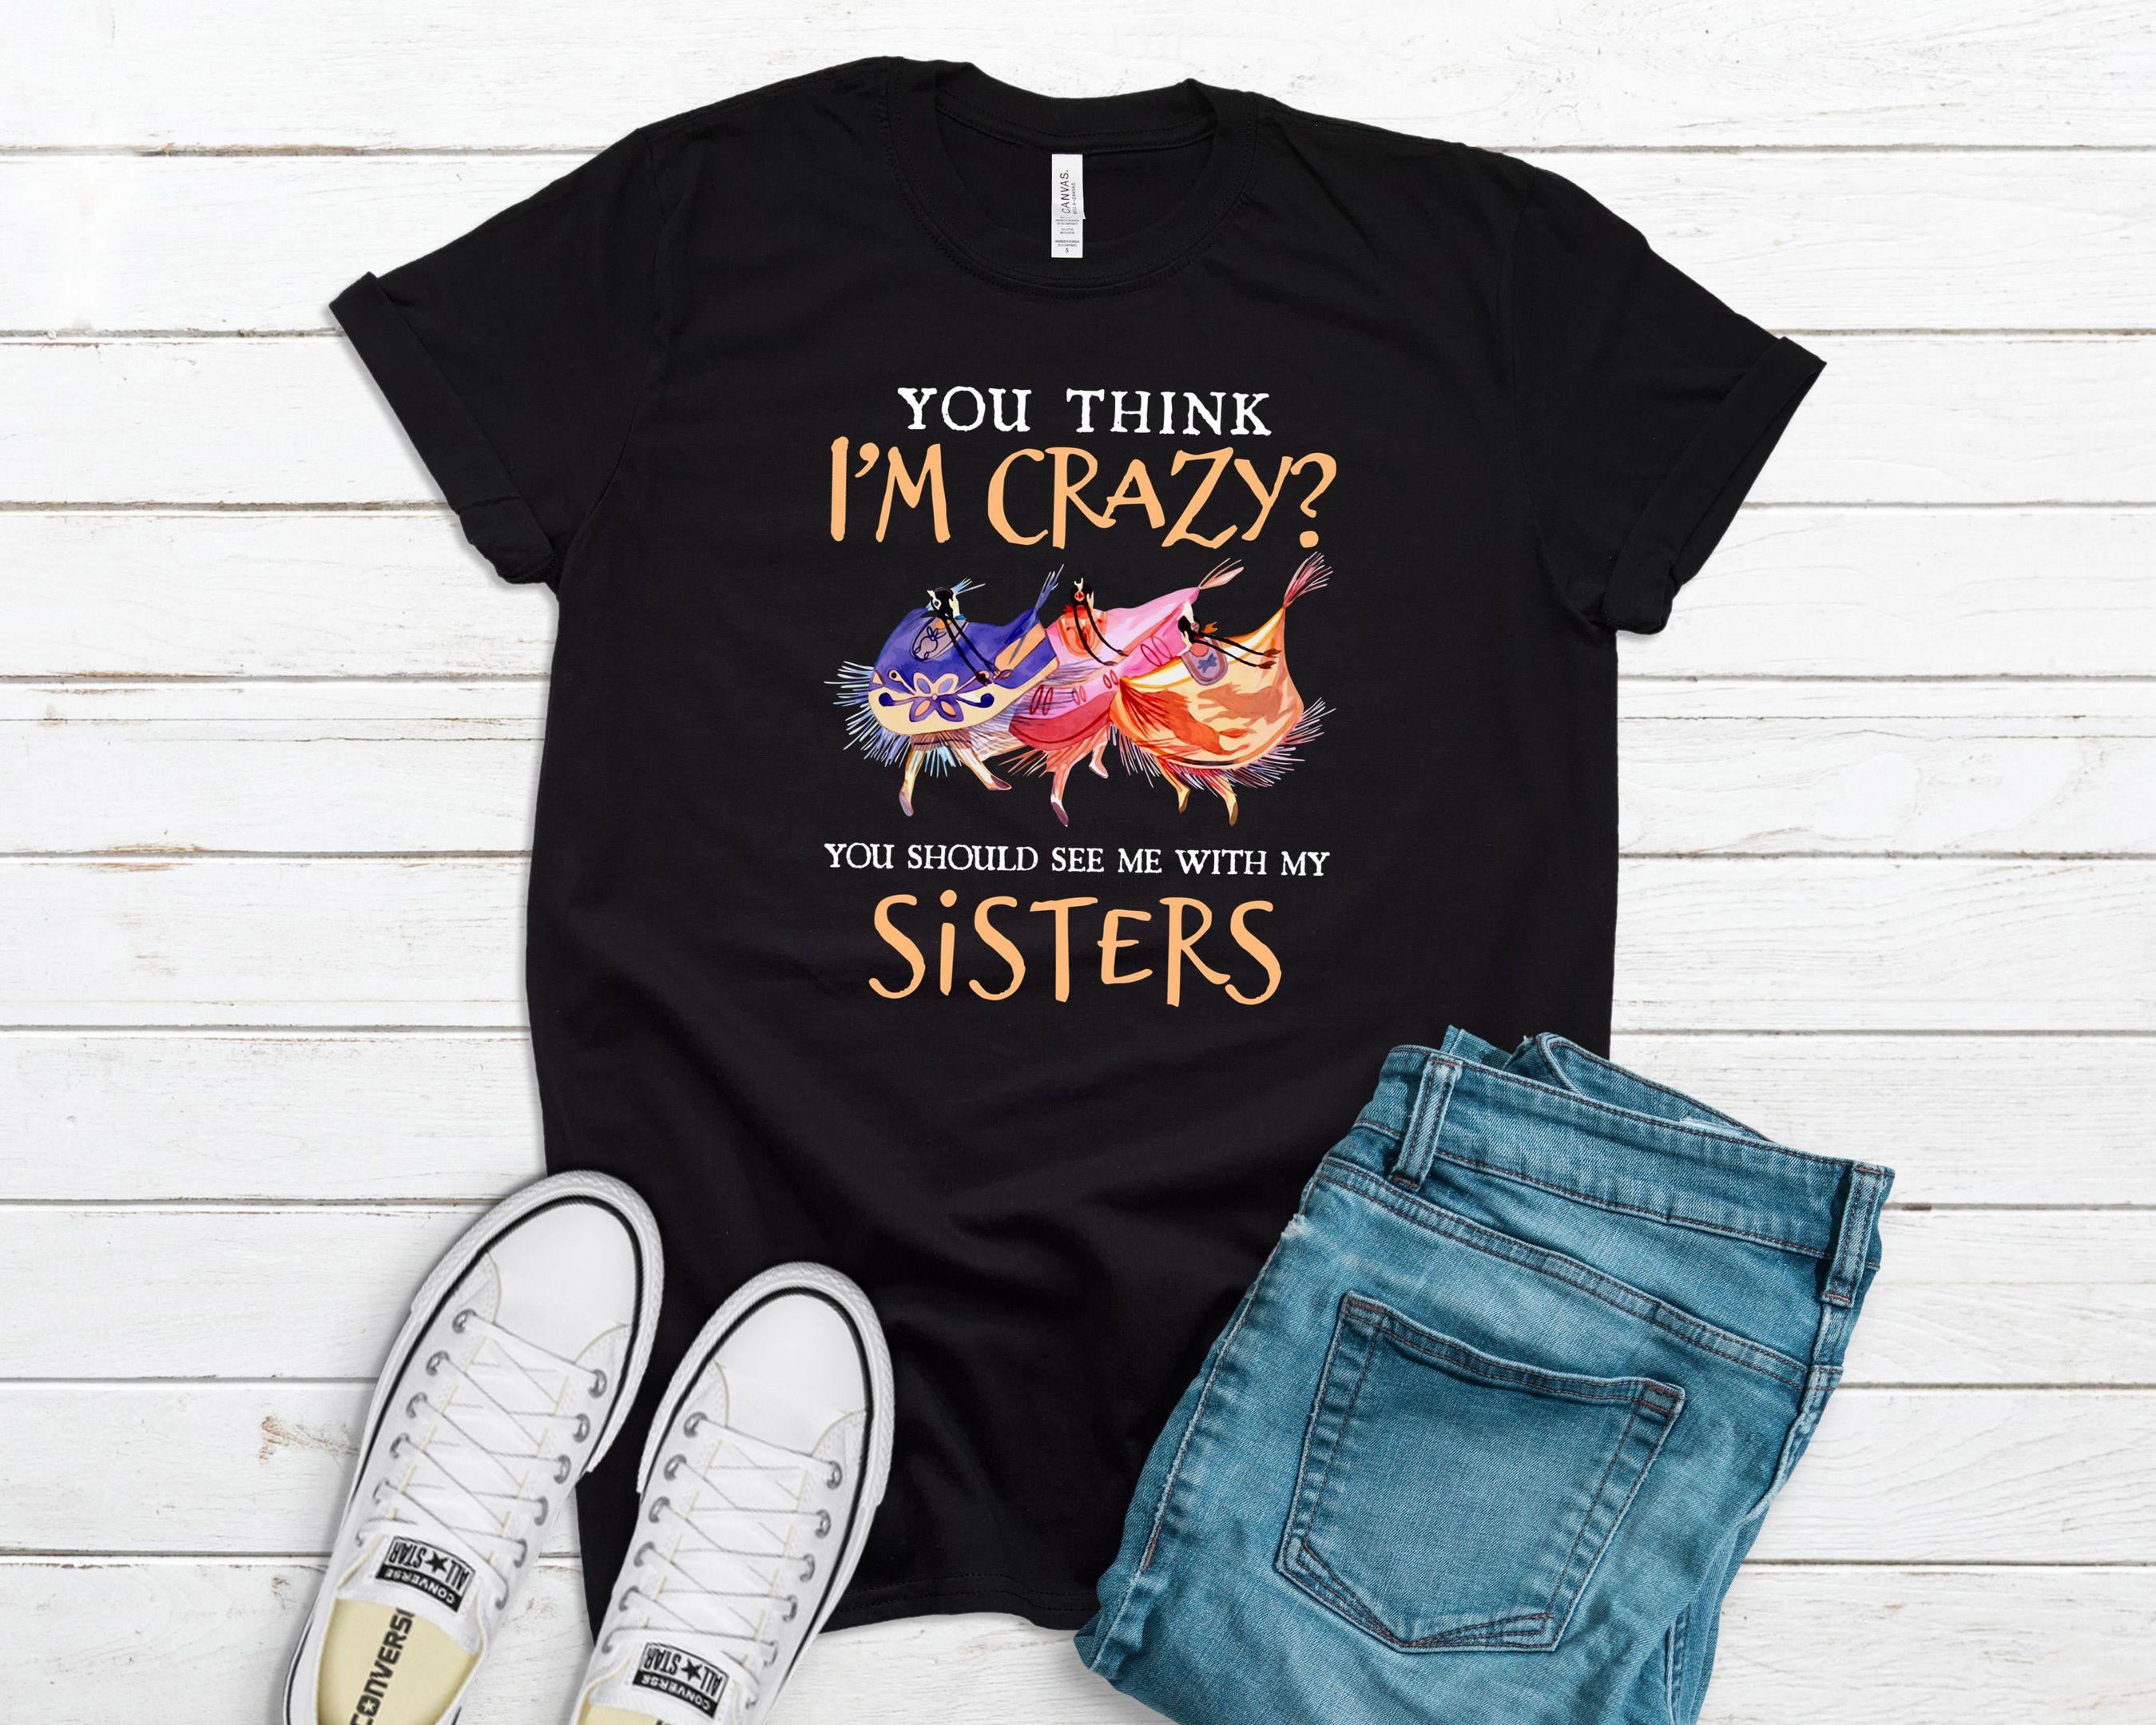 You Should See Me With My Sisters Shirt, Native Woman Shirt, Native Sister Shirt, Indigenous Woman Shirt